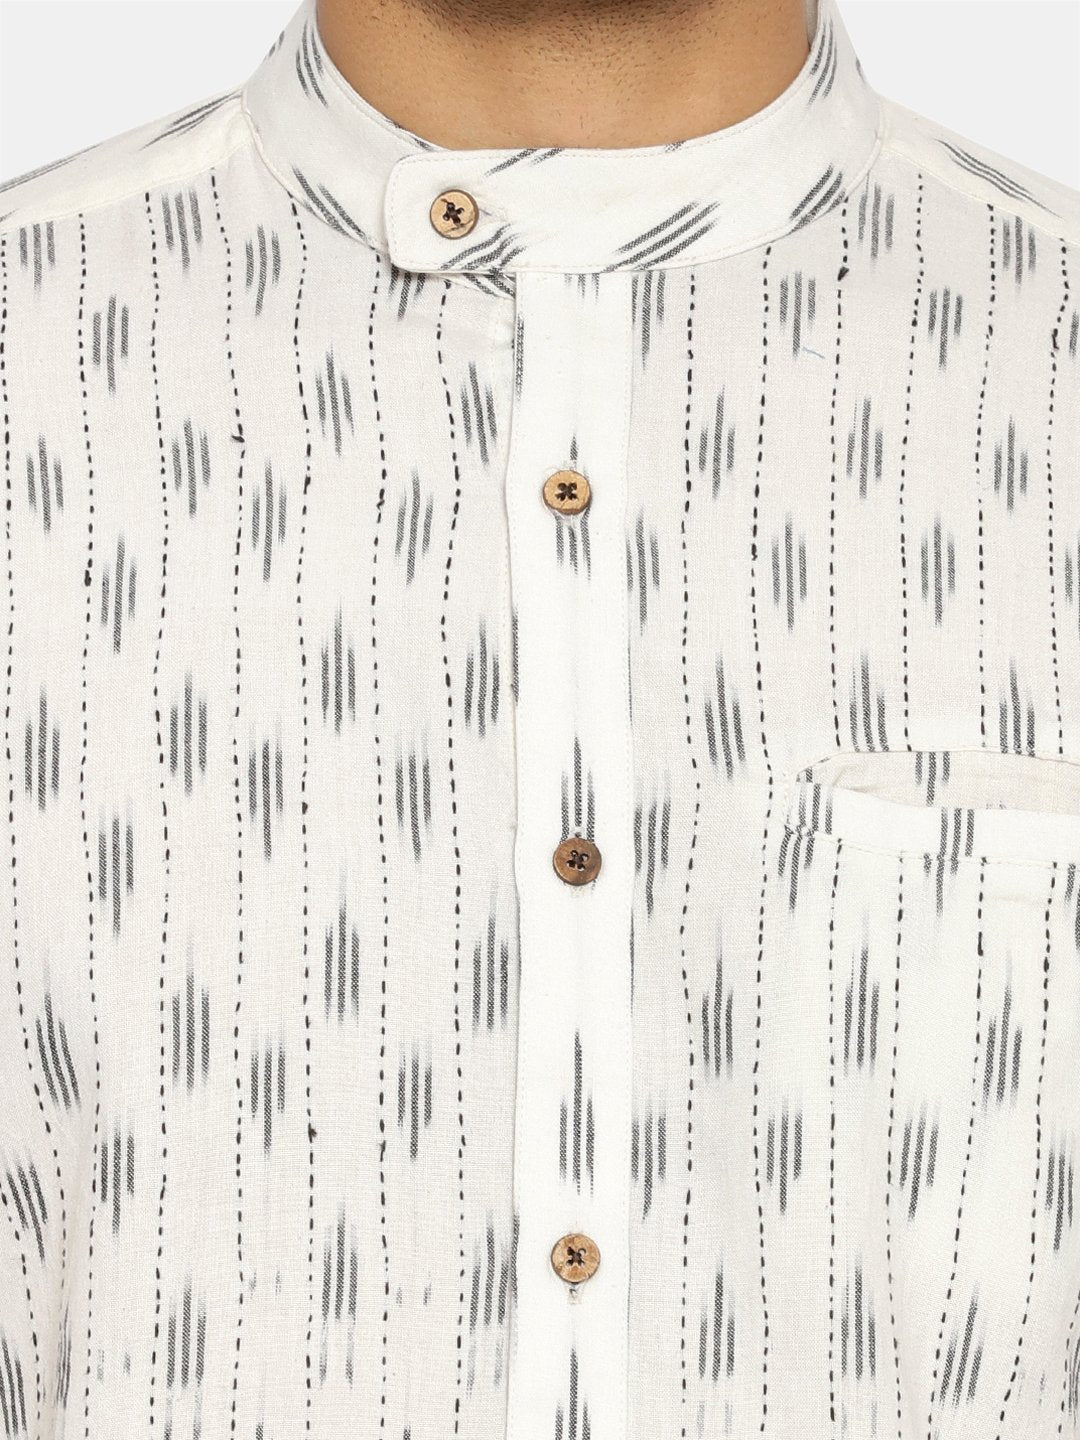 White ikat extended collared shirt